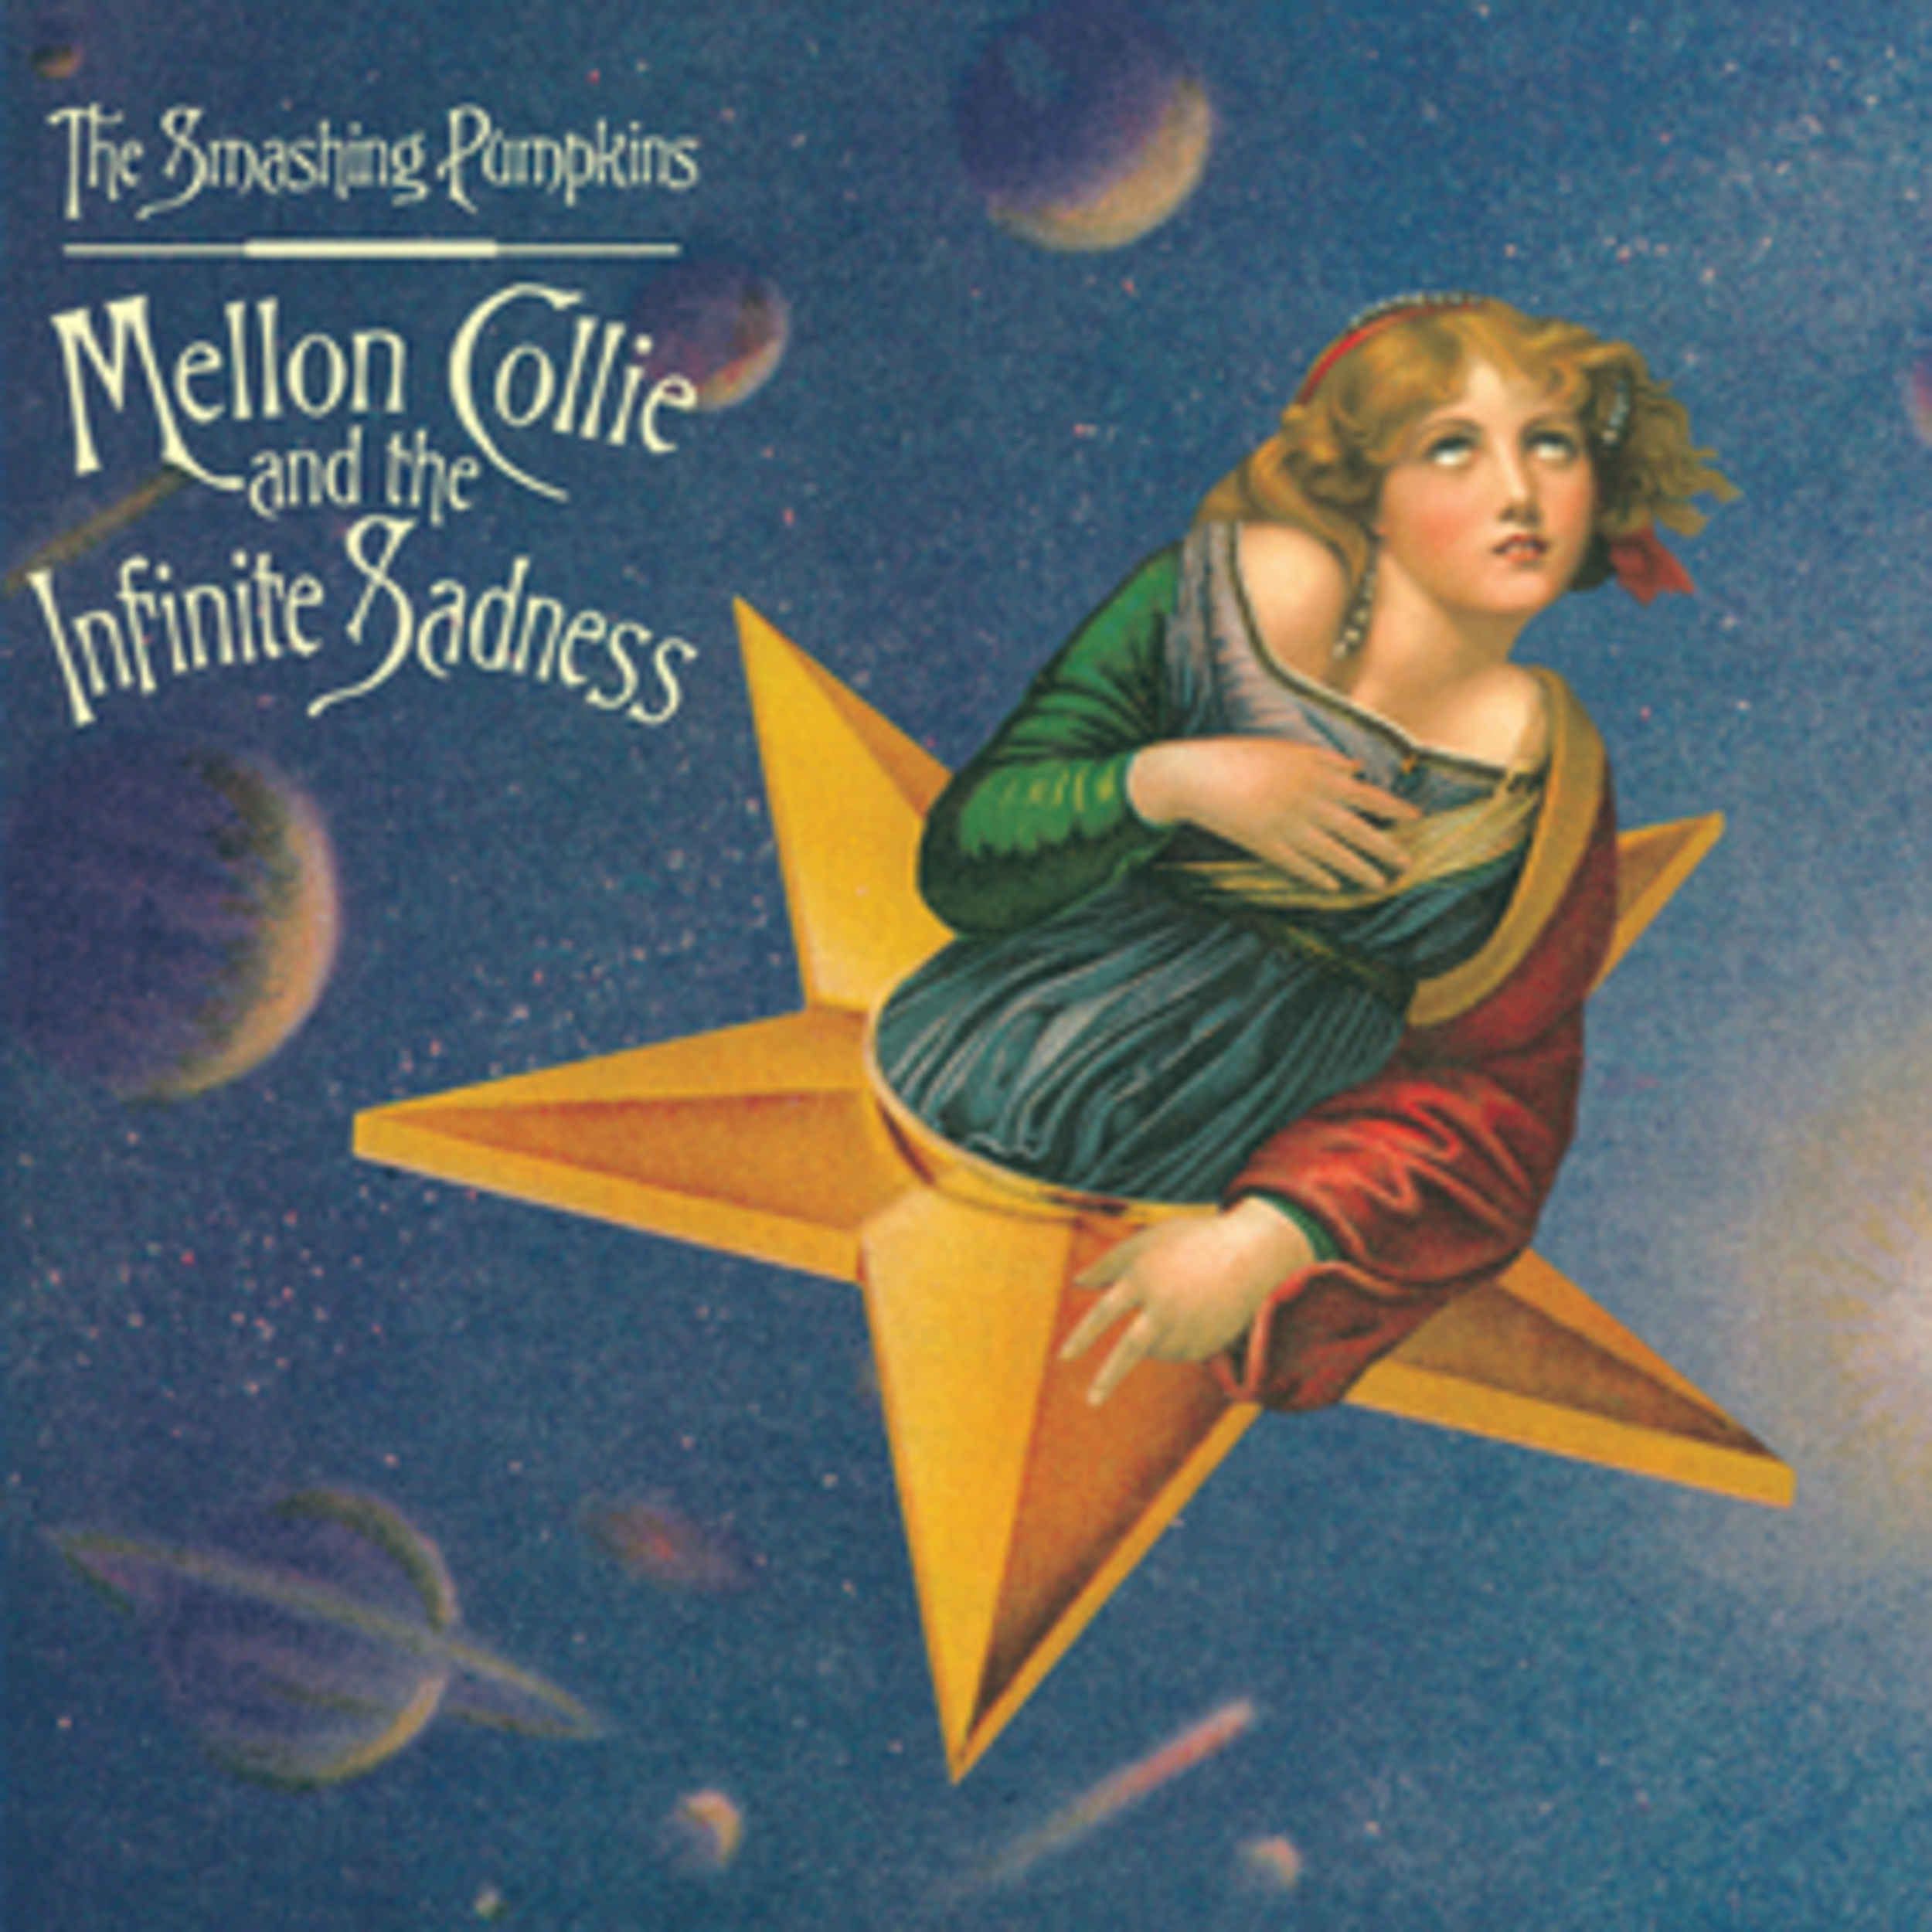 <p>Undoubtedly a deep cut from <em>Mellon Collie and the Infinite Sadness</em>. It's probably only devoted and longtime fans of the band who are aware of its existence. It's a melodic track that picks up for a brief but <a href="https://www.youtube.com/watch?v=1BmxK5_5rbs">unforgettable and passionate moment roughly 3 1/2 minutes</a> in. A time sequence that is as musically powerful as anything Billy Corgan and Co. has ever produced. For those unaware of the track, consider this your introduction. </p>